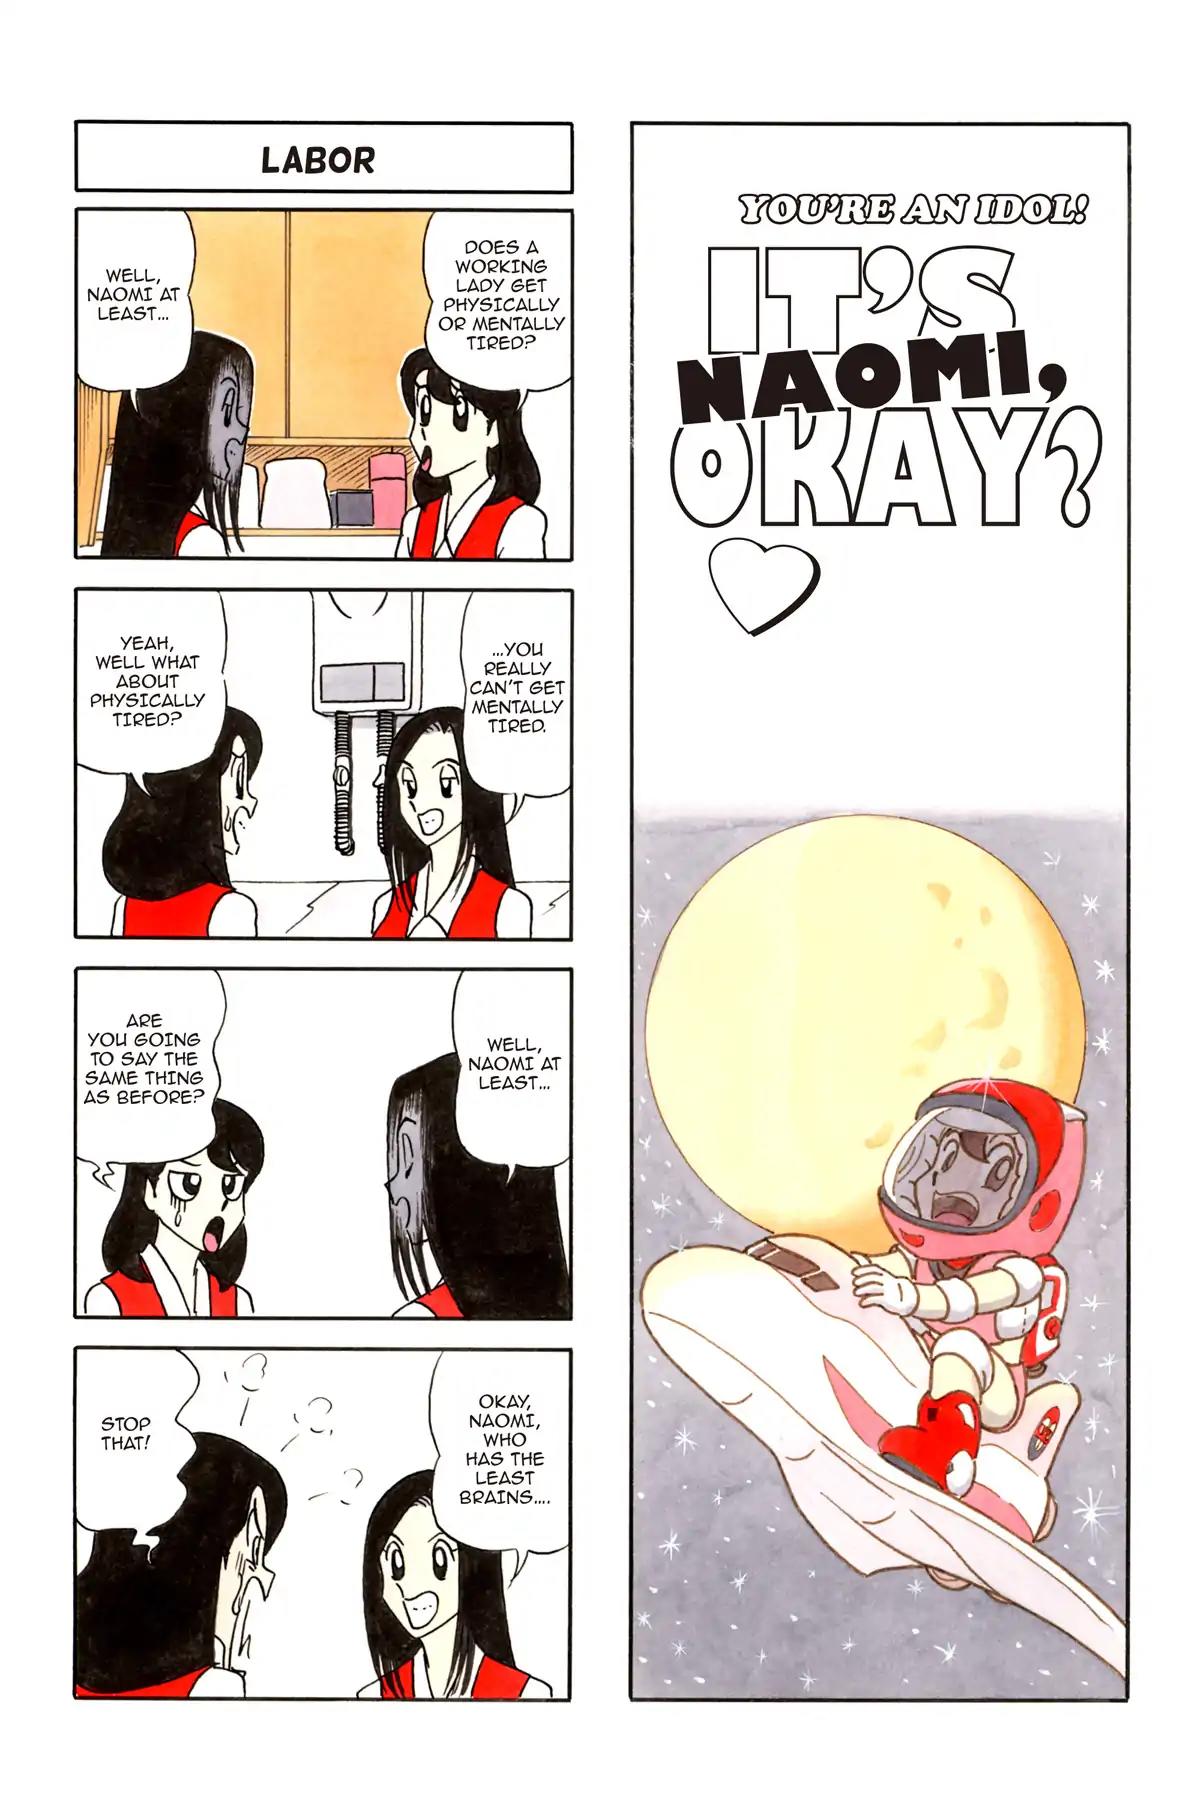 It's Naomi, Okay? After 16 Vol 1 Chapter 4